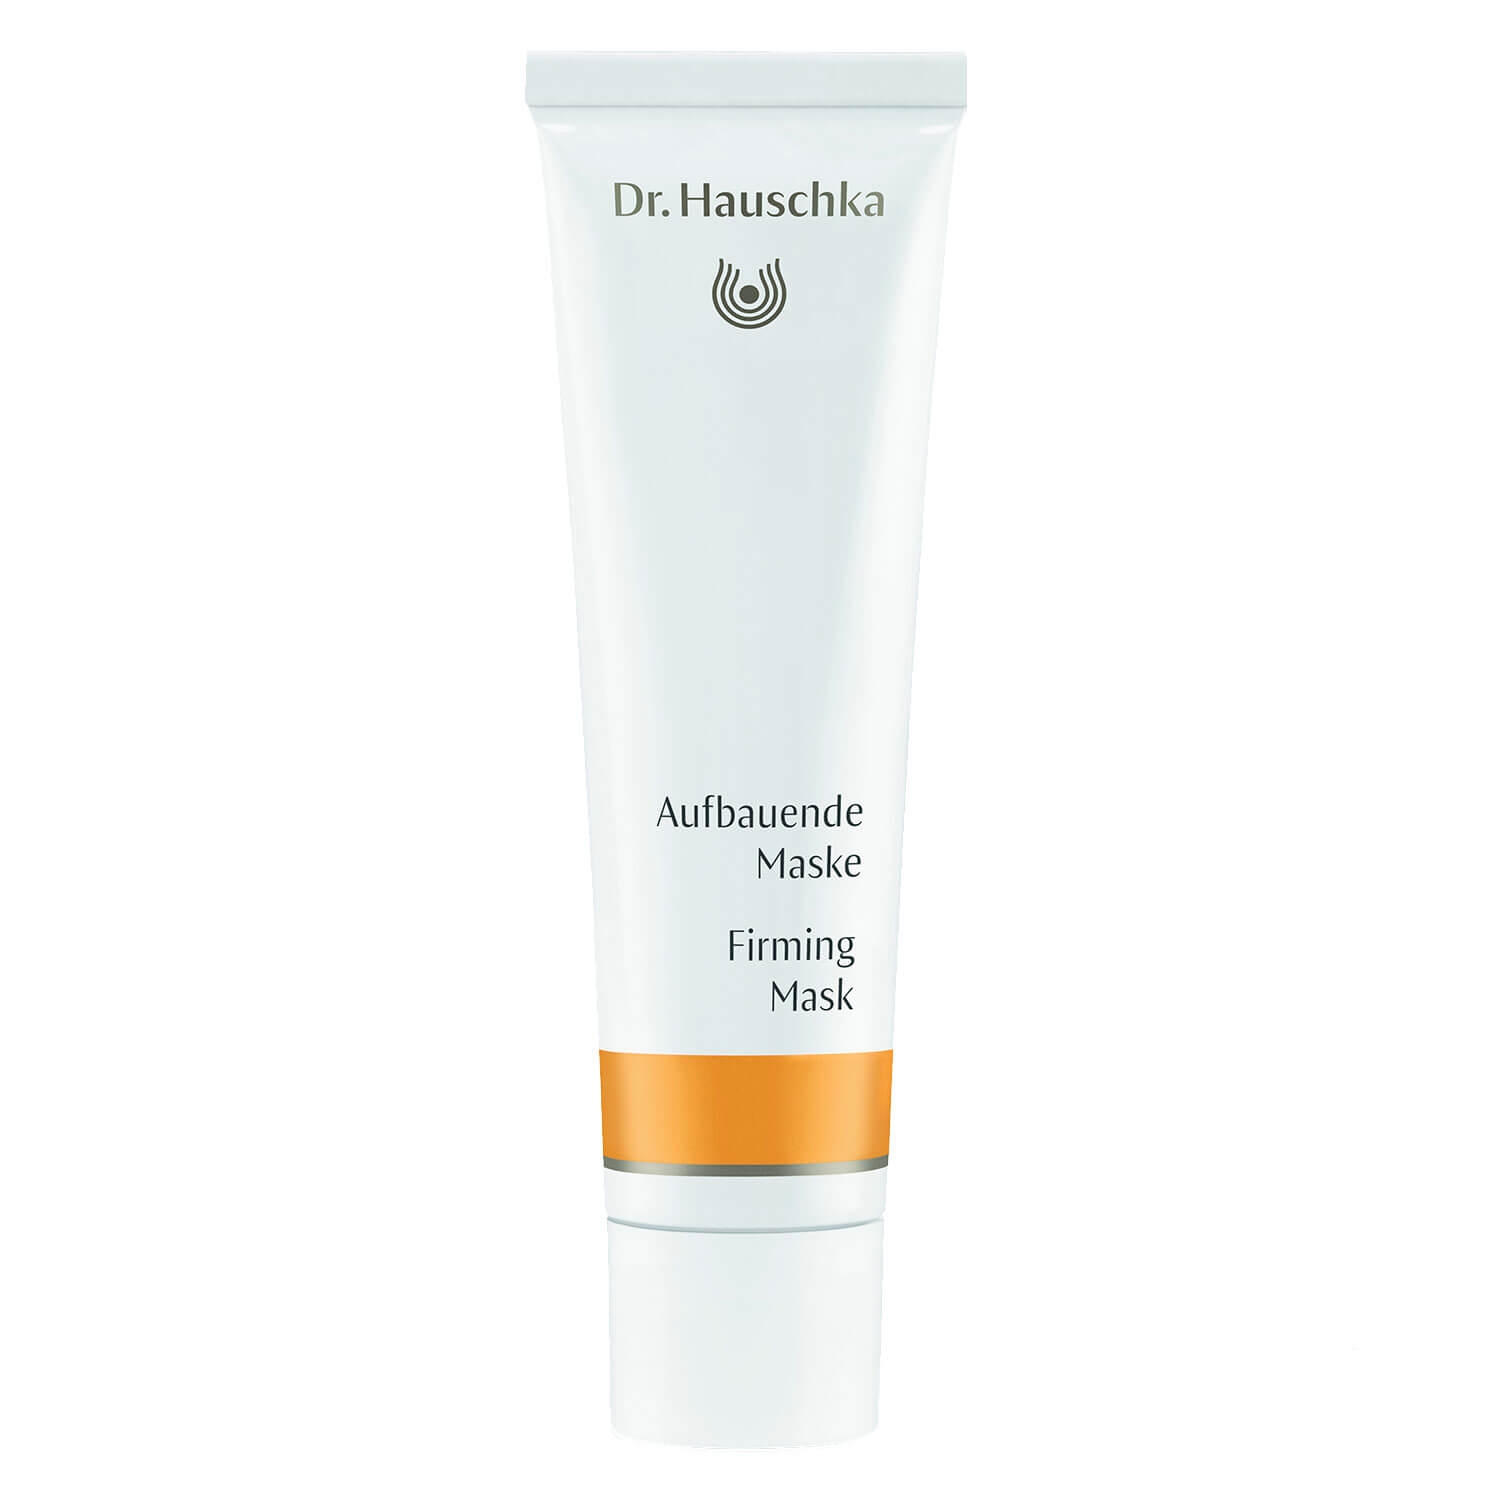 Product image from Dr. Hauschka - Aufbauende Maske